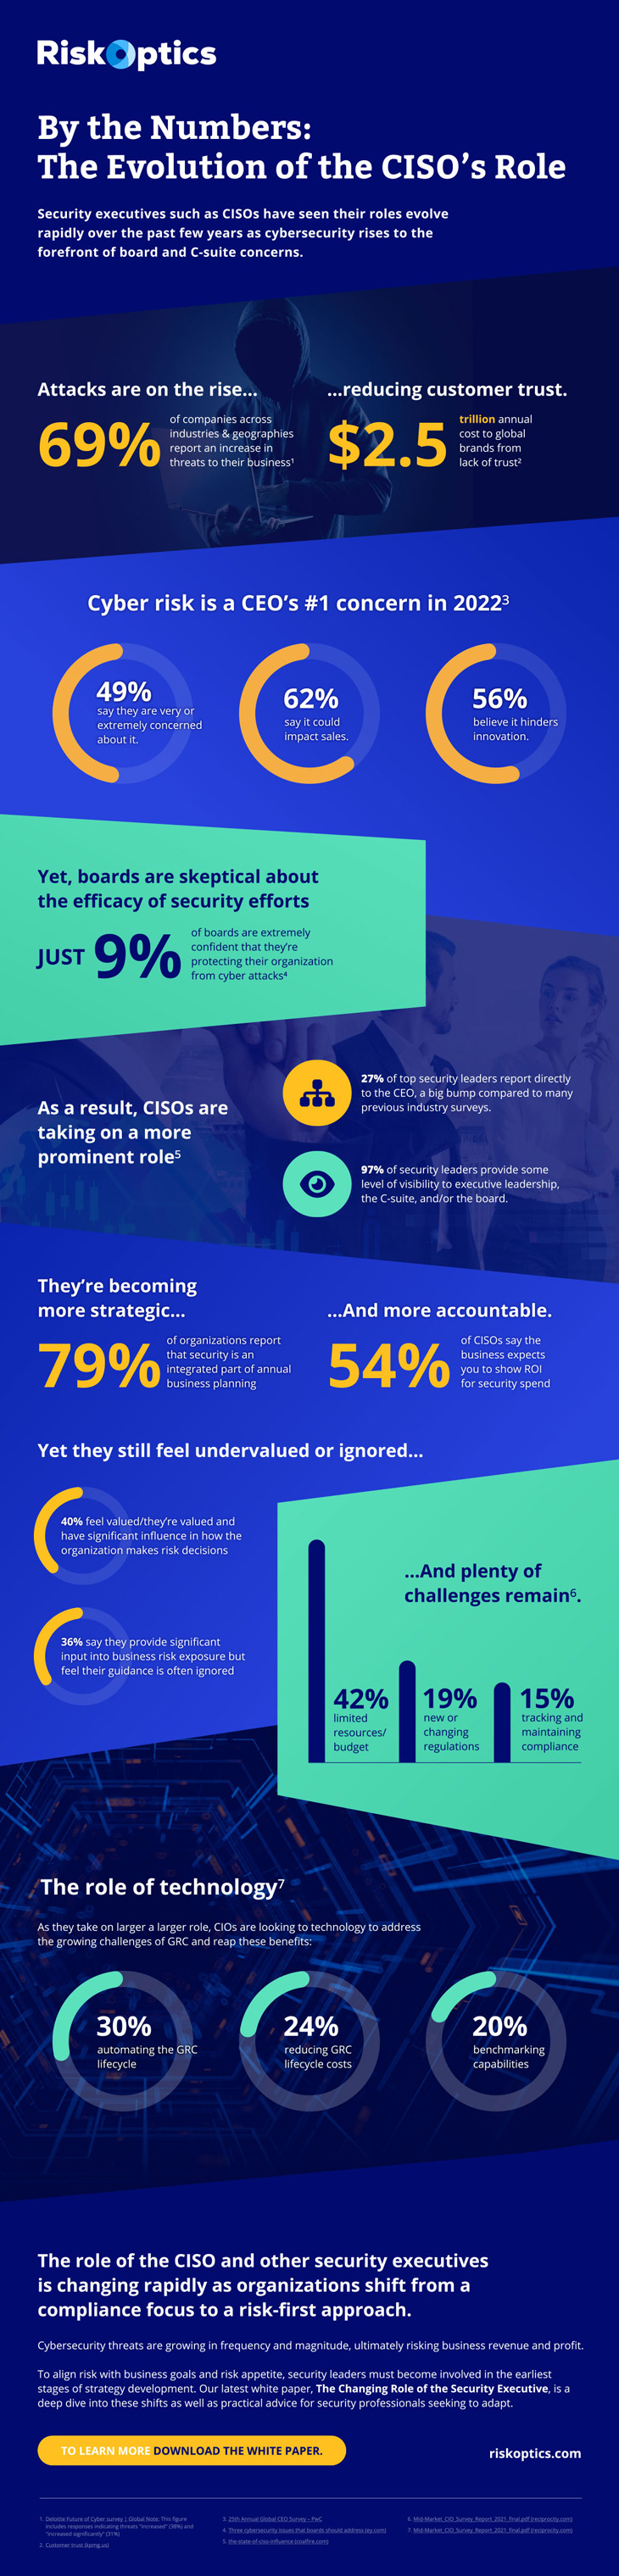 infographic - By the Numbers: The Evolution of the CISO’s Role